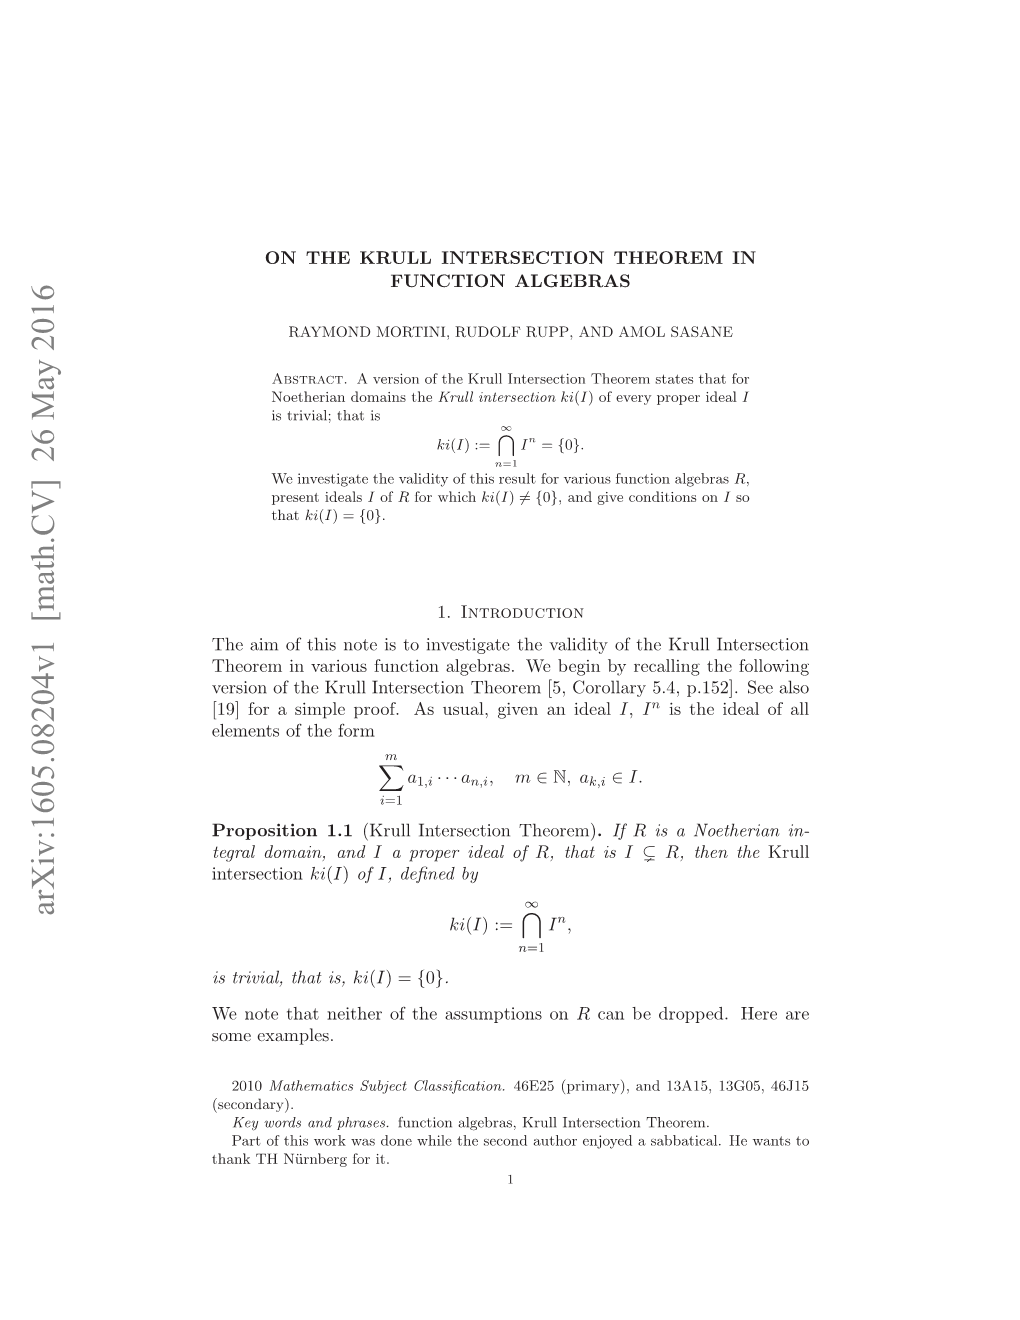 On the Krull Intersection Theorem in Function Algebras